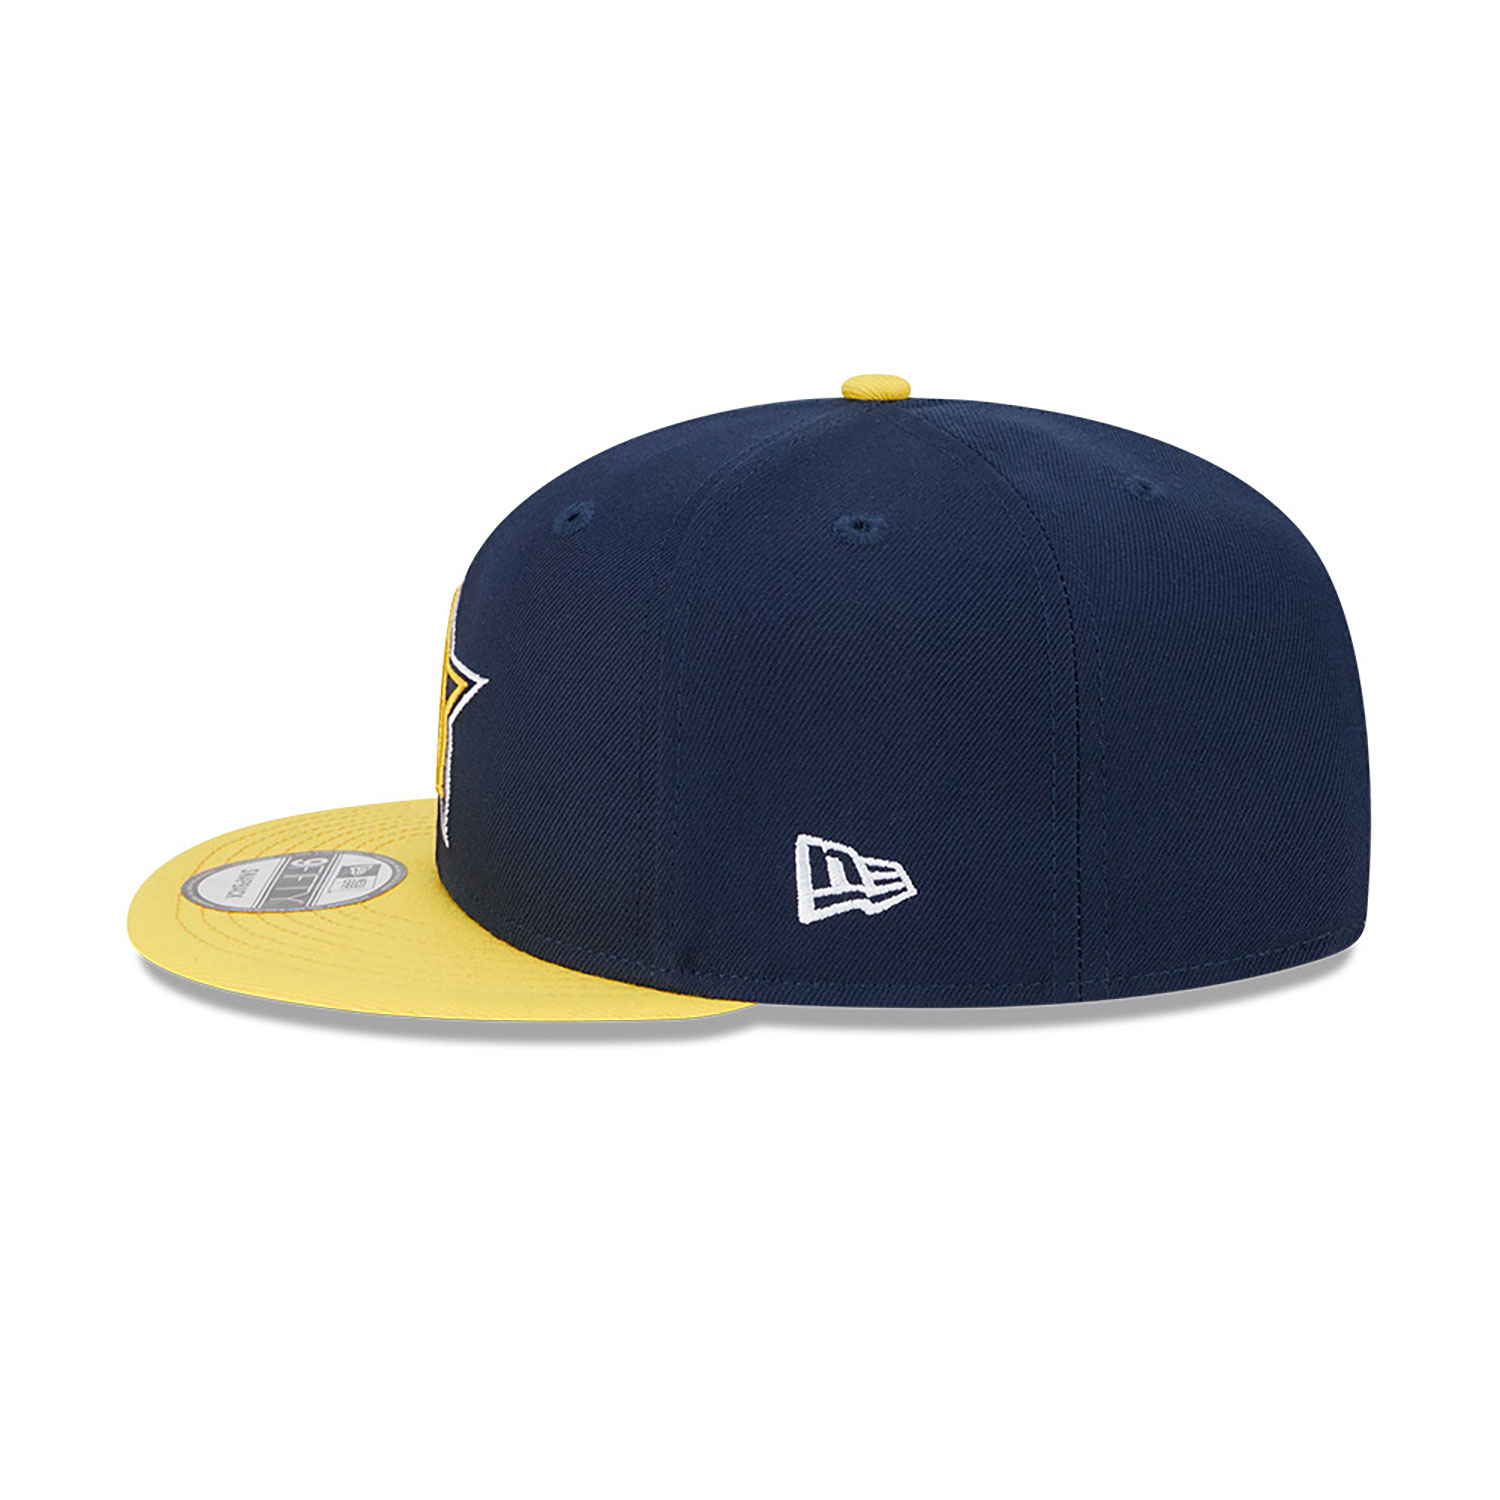 NBA All Star Game 2024 Navy 9FIFTY Snapback Cap